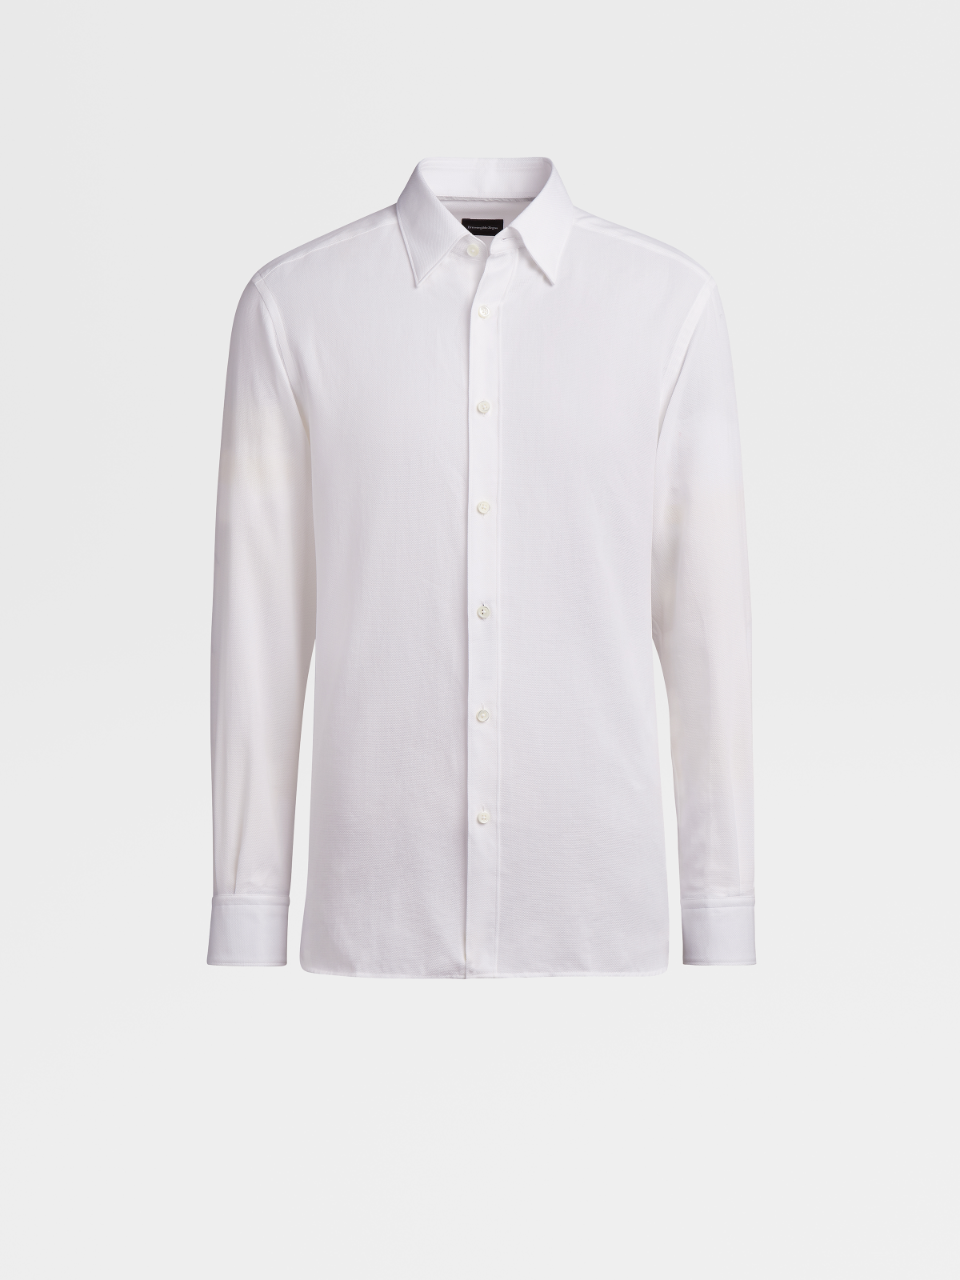 White Cotton Long-sleeve Shirt, Loose Fit